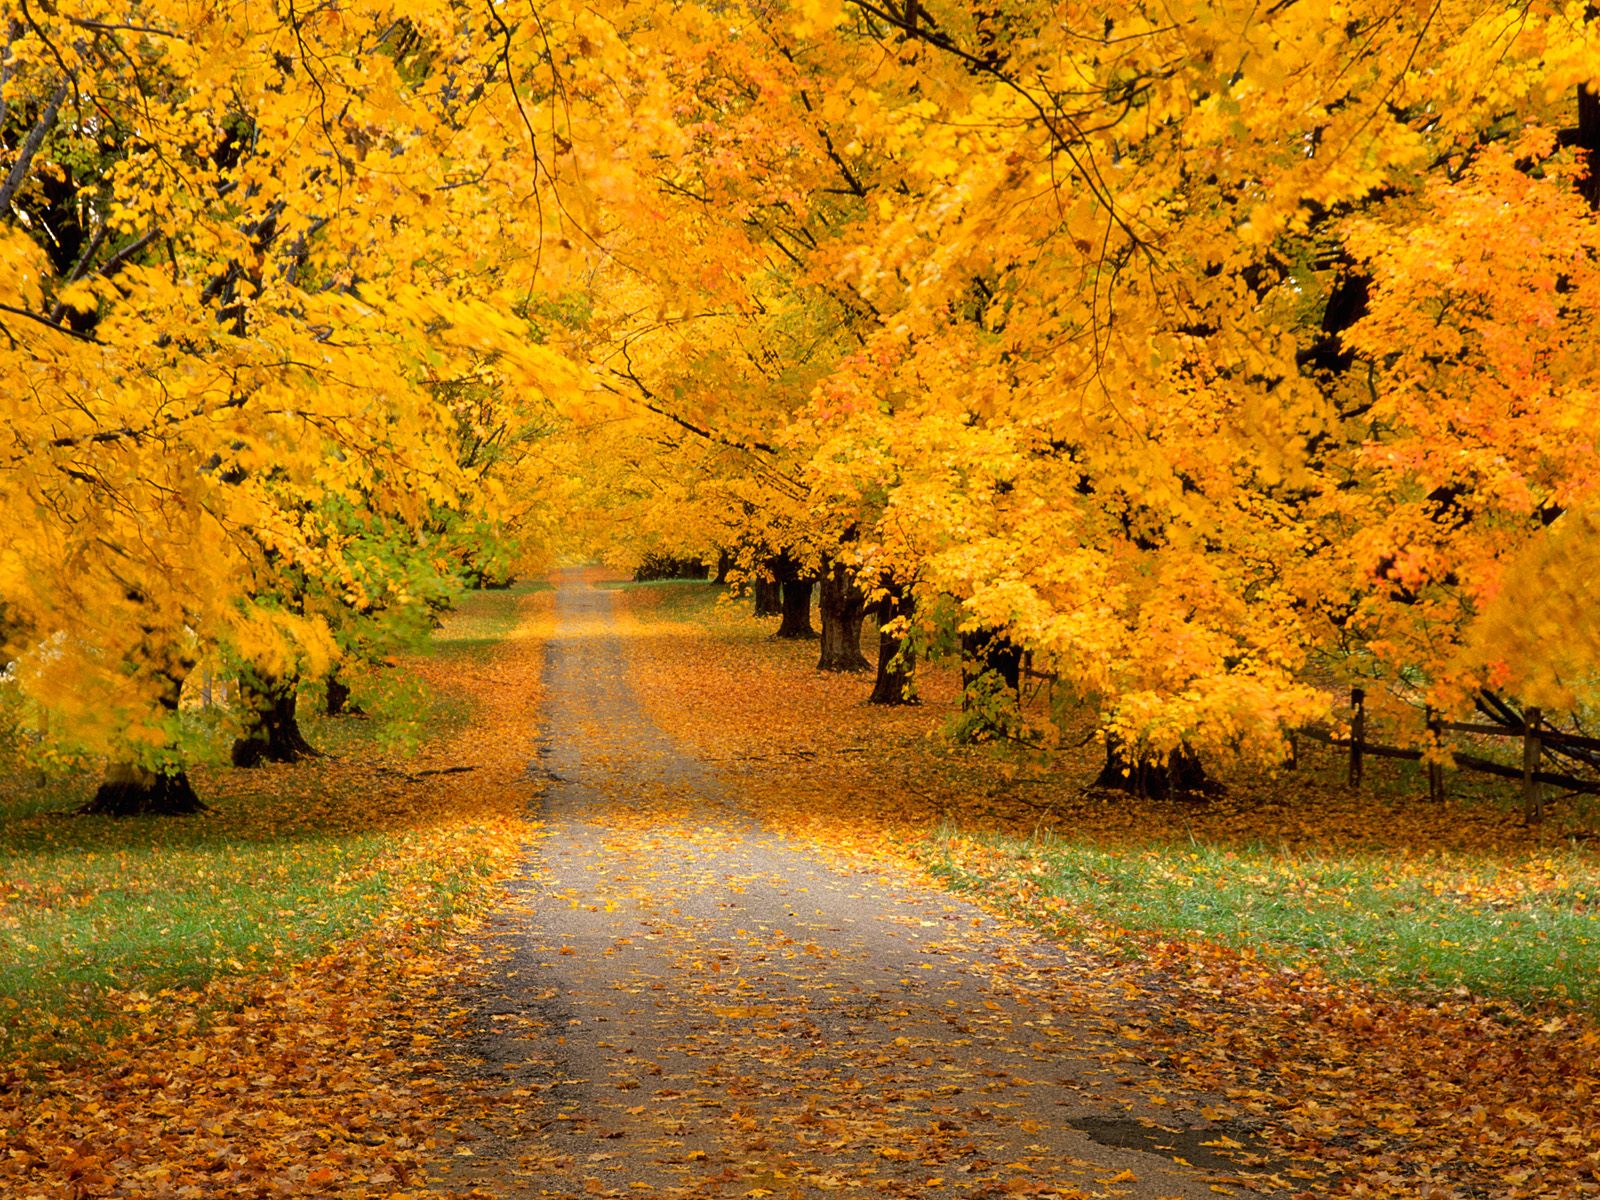   Autumn Covered Road   Cool Backgrounds and Wallpapers 1600x1200